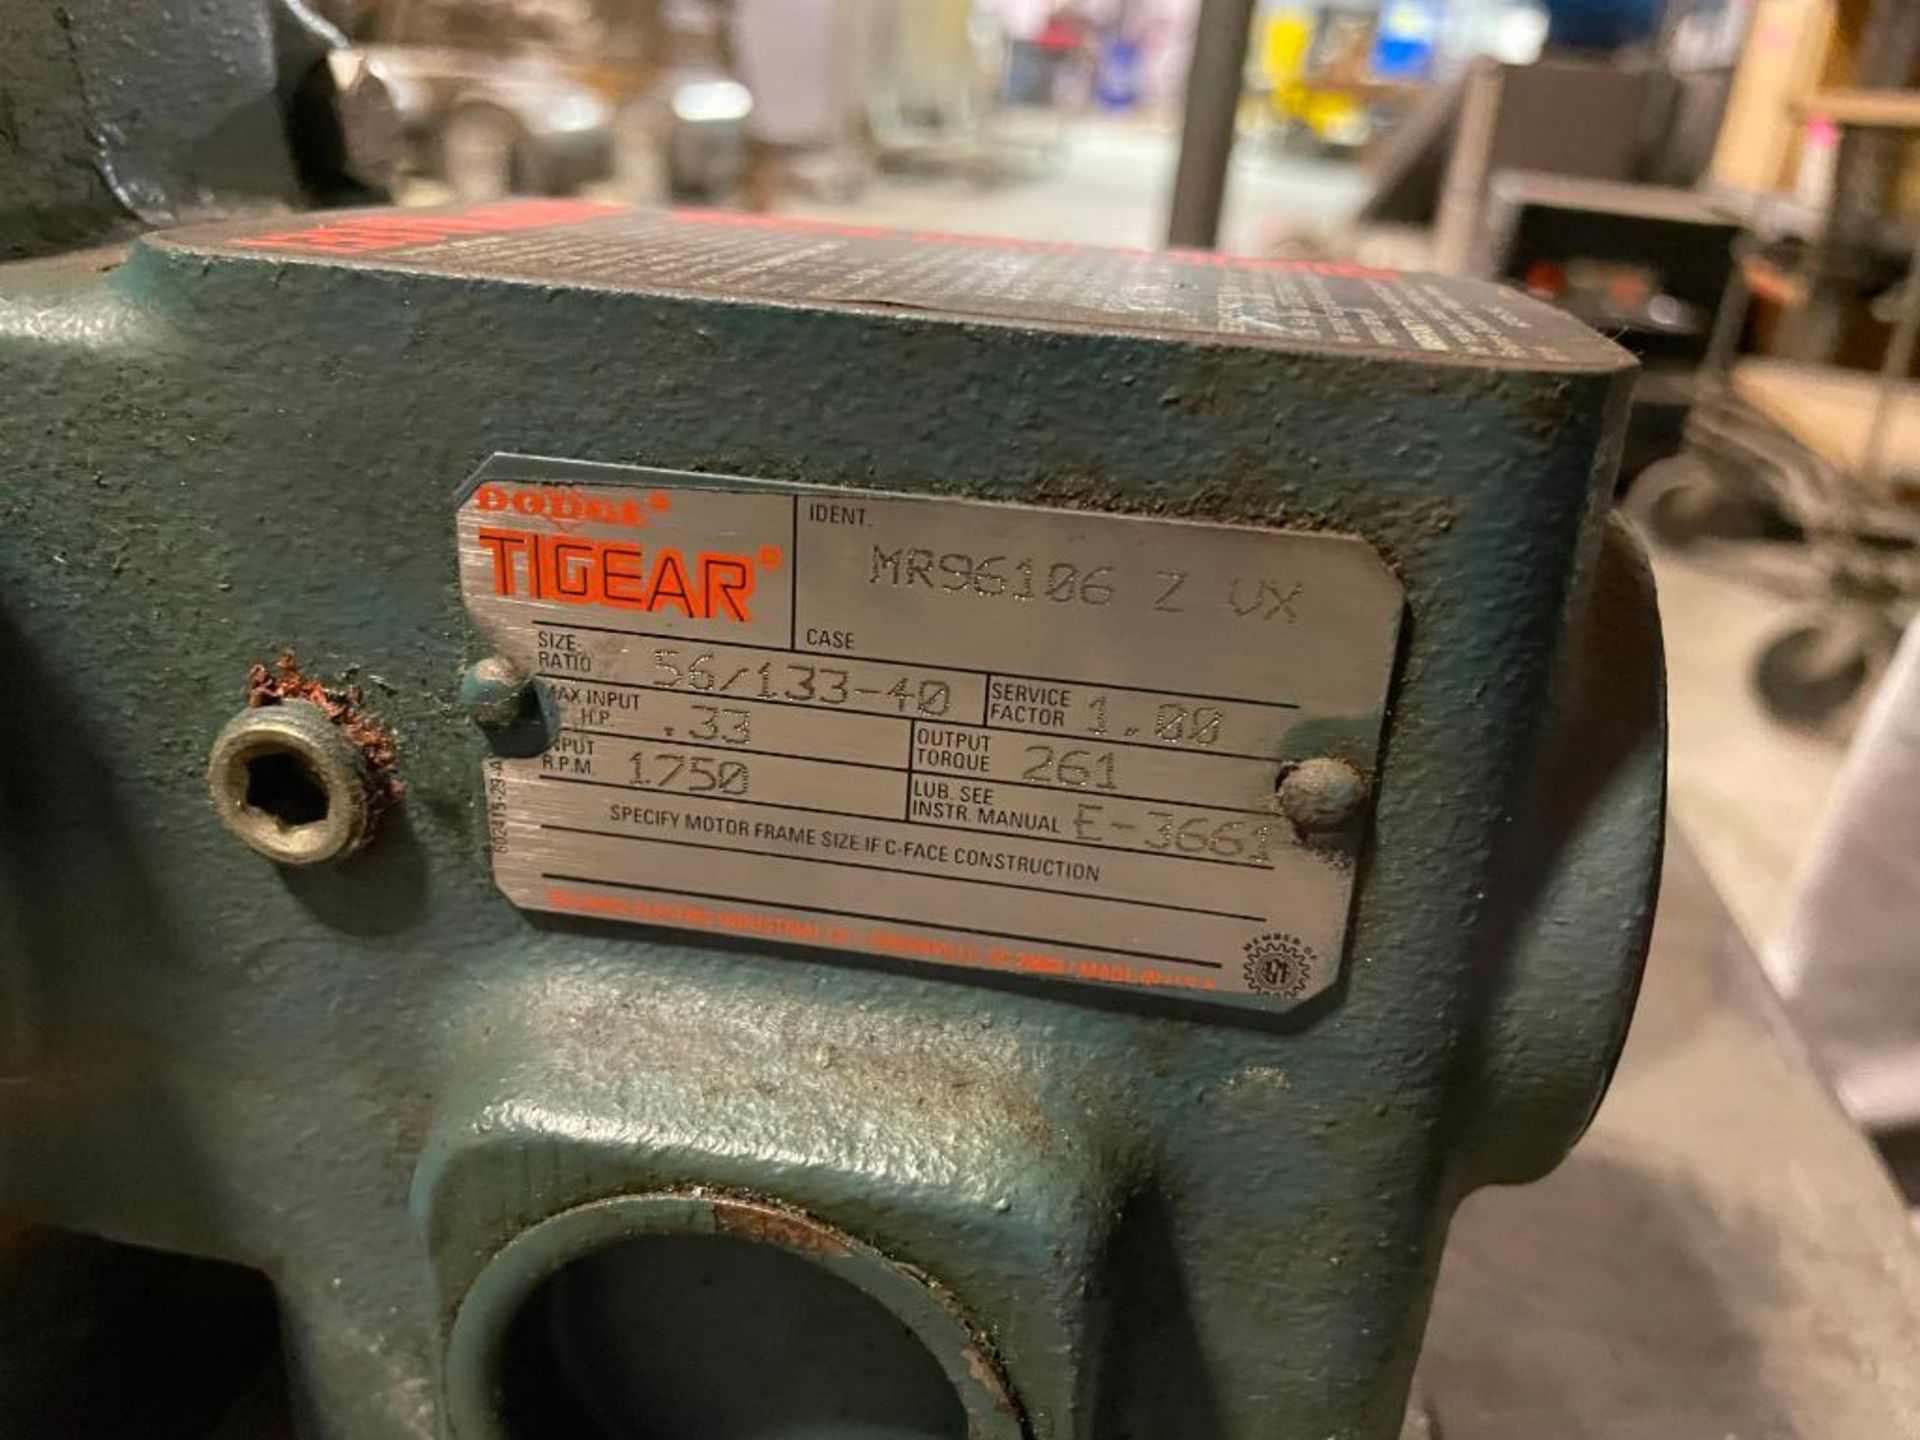 DODGE TIGEAR GEAR REDUCER W/ ELECTRICAL CONTROL PANEL/SWITCH QTY: 1 - Image 5 of 6